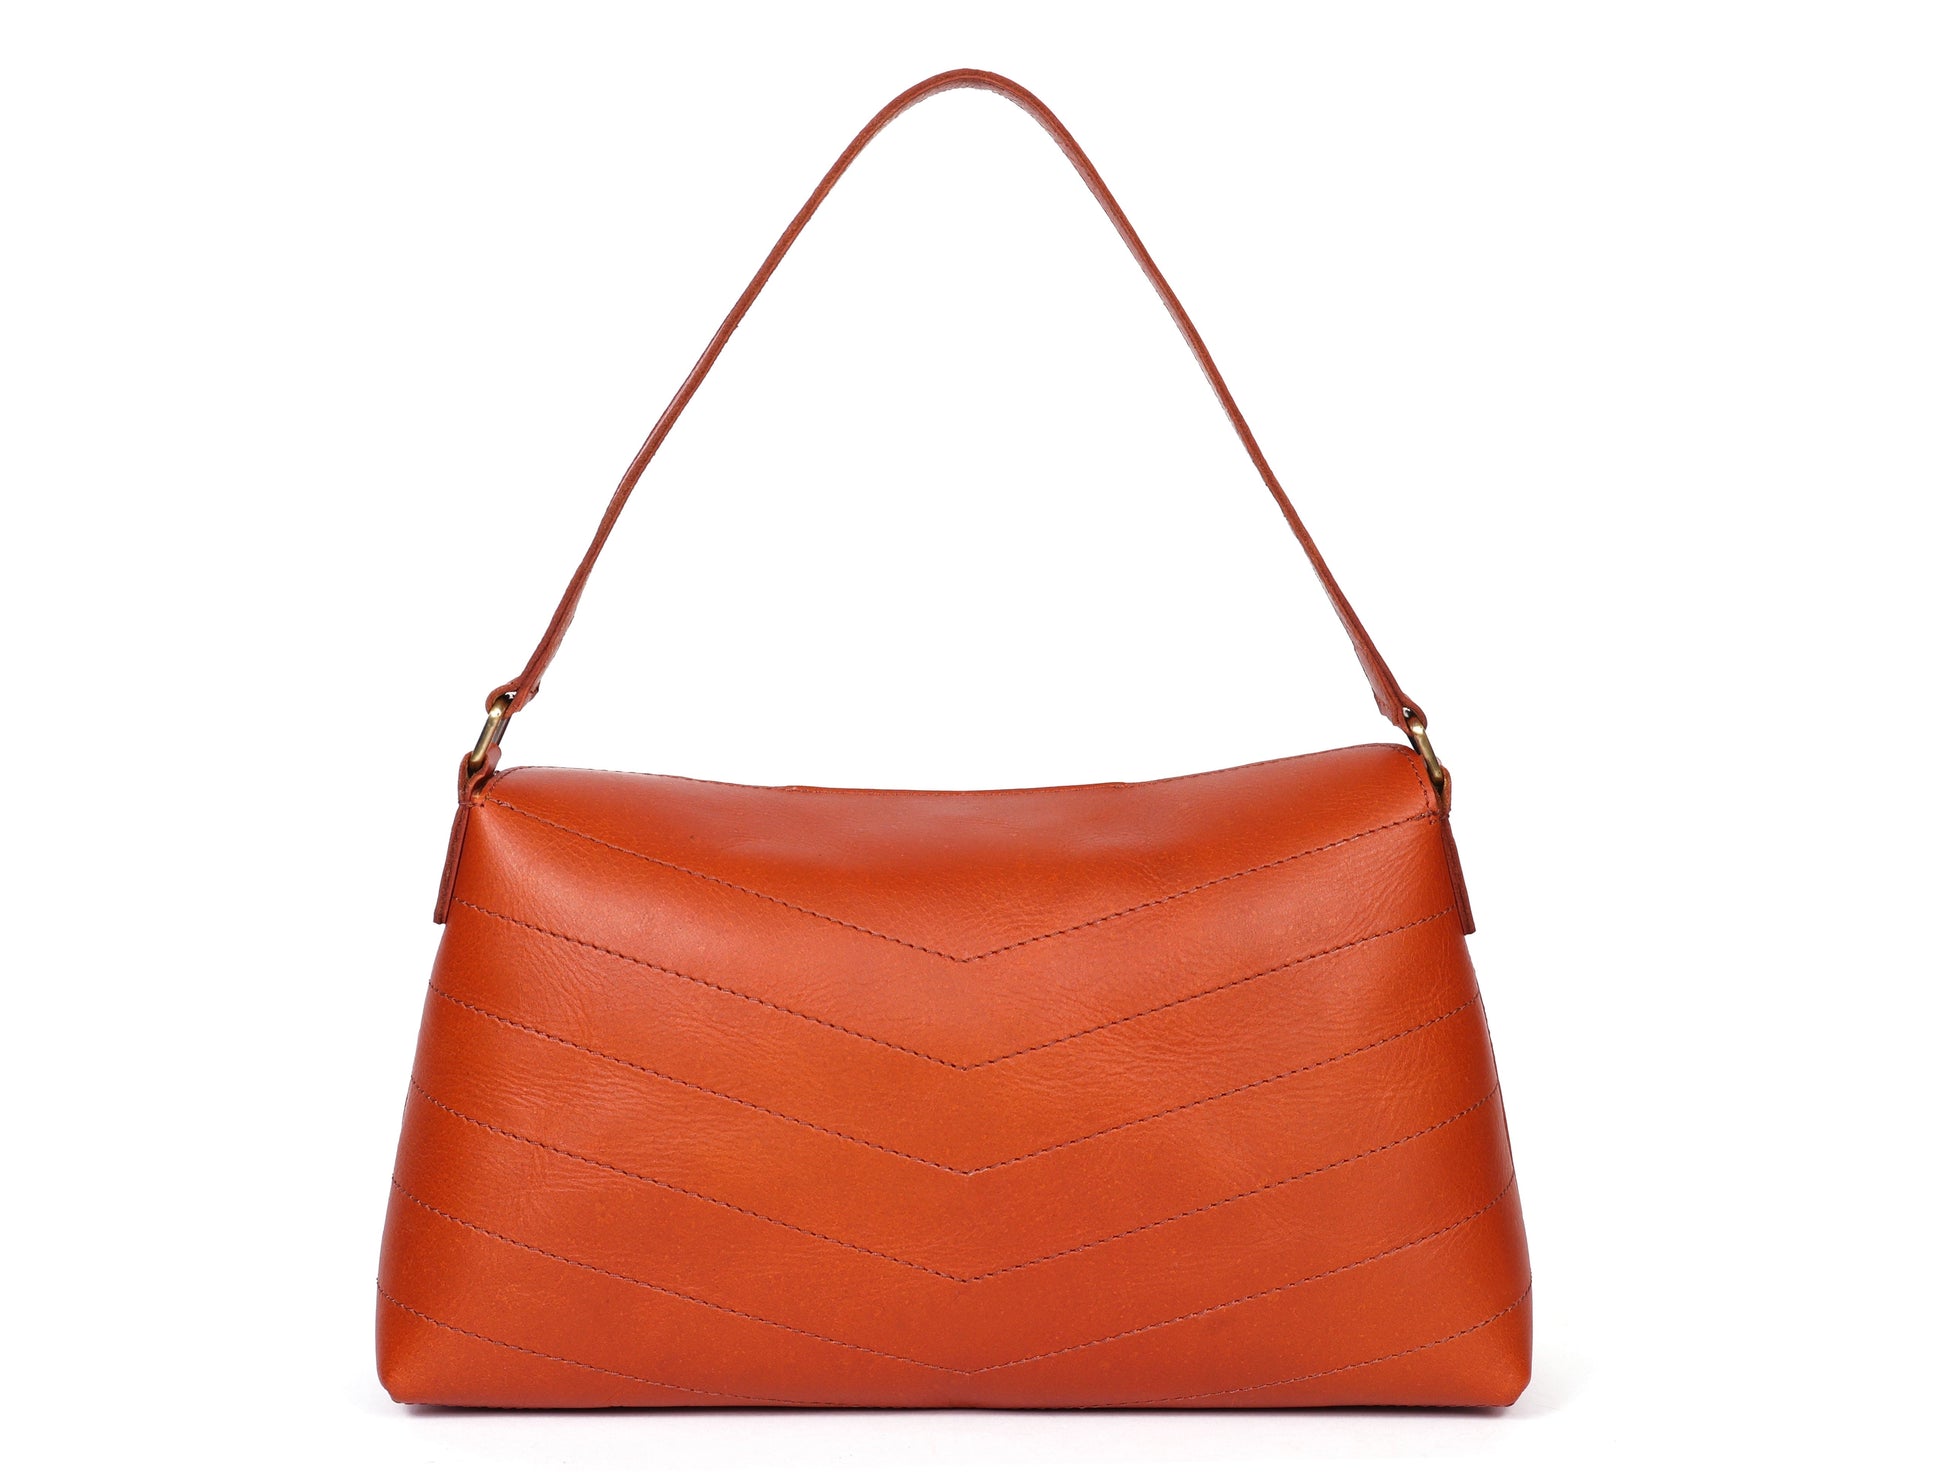 Exquisite Tan Leather Small Sling Bag - CELTICINDIA